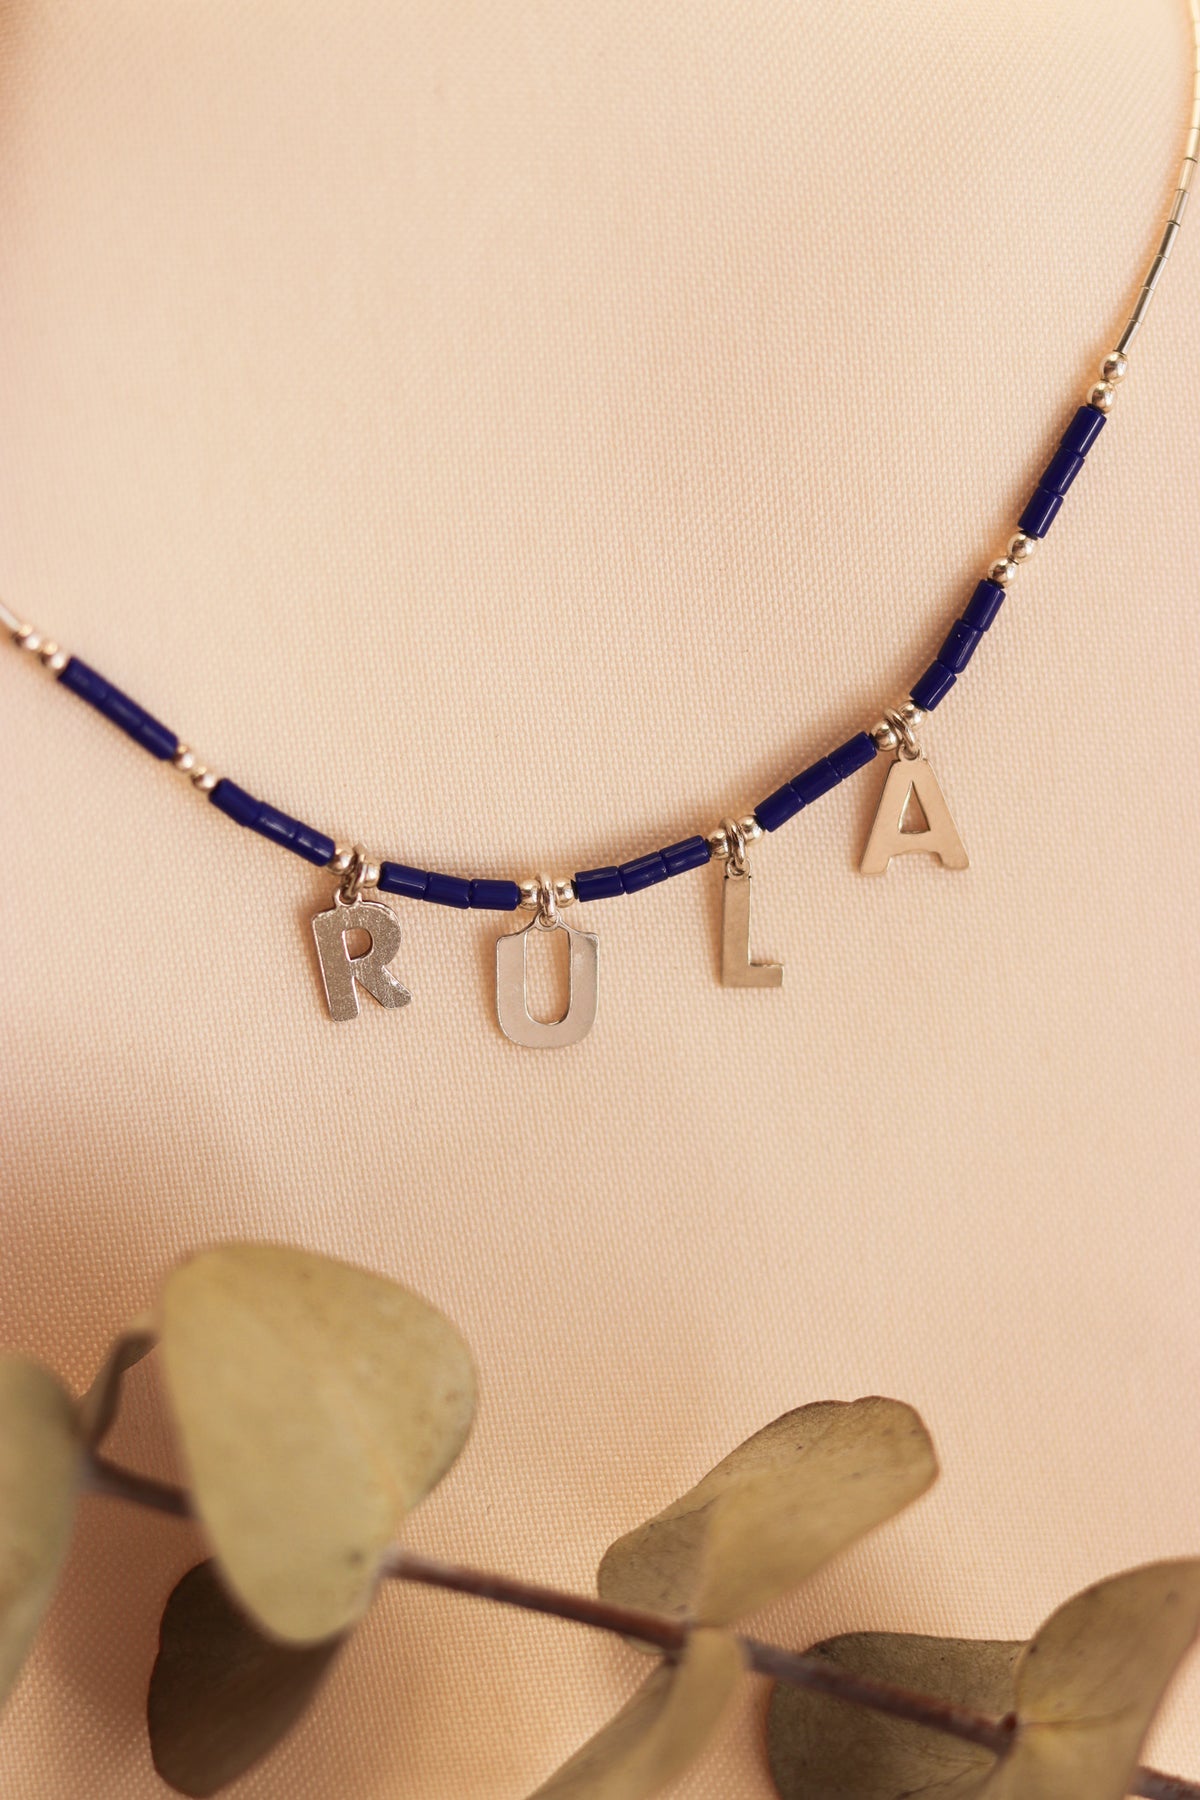 Custom name letters necklace with beads